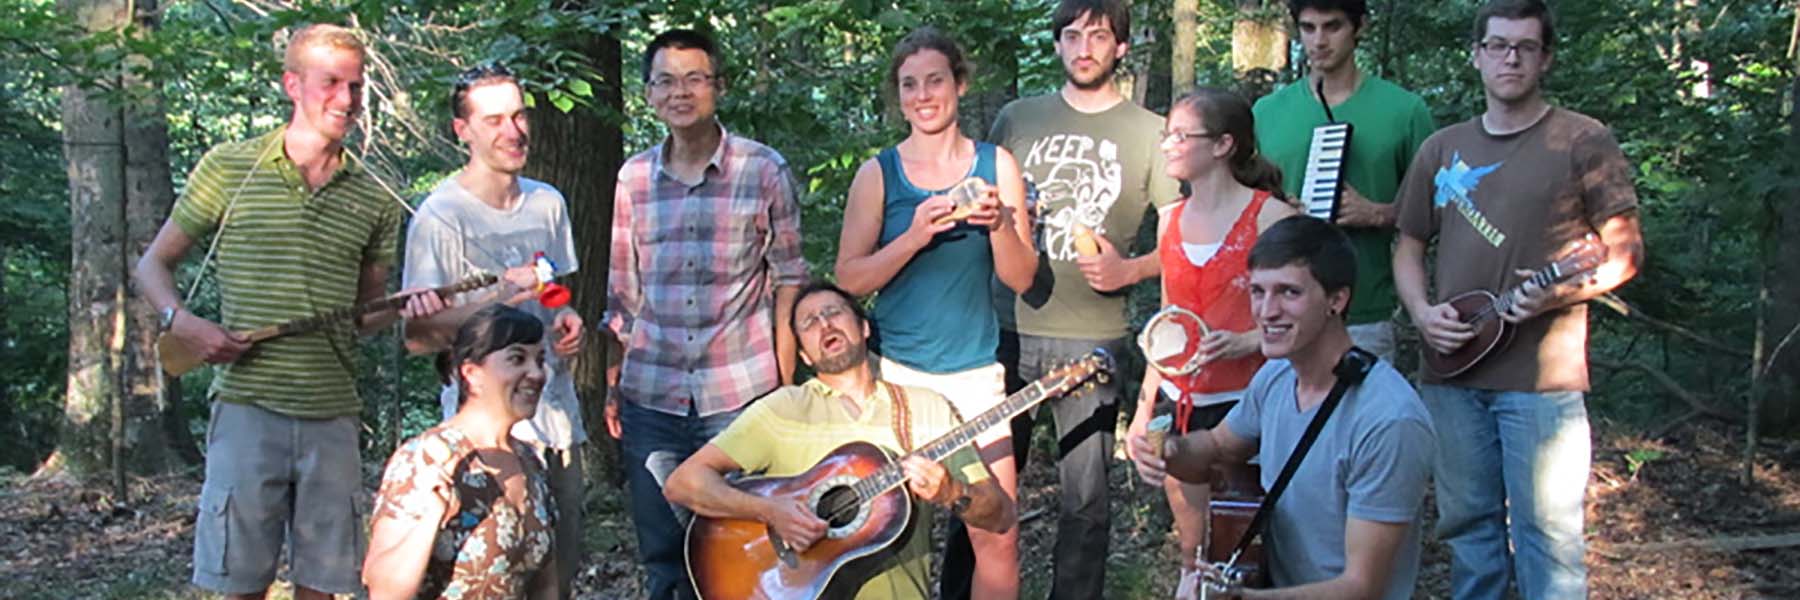 Lab members gather for a group photo in the woods with guitars and other musical instruments.